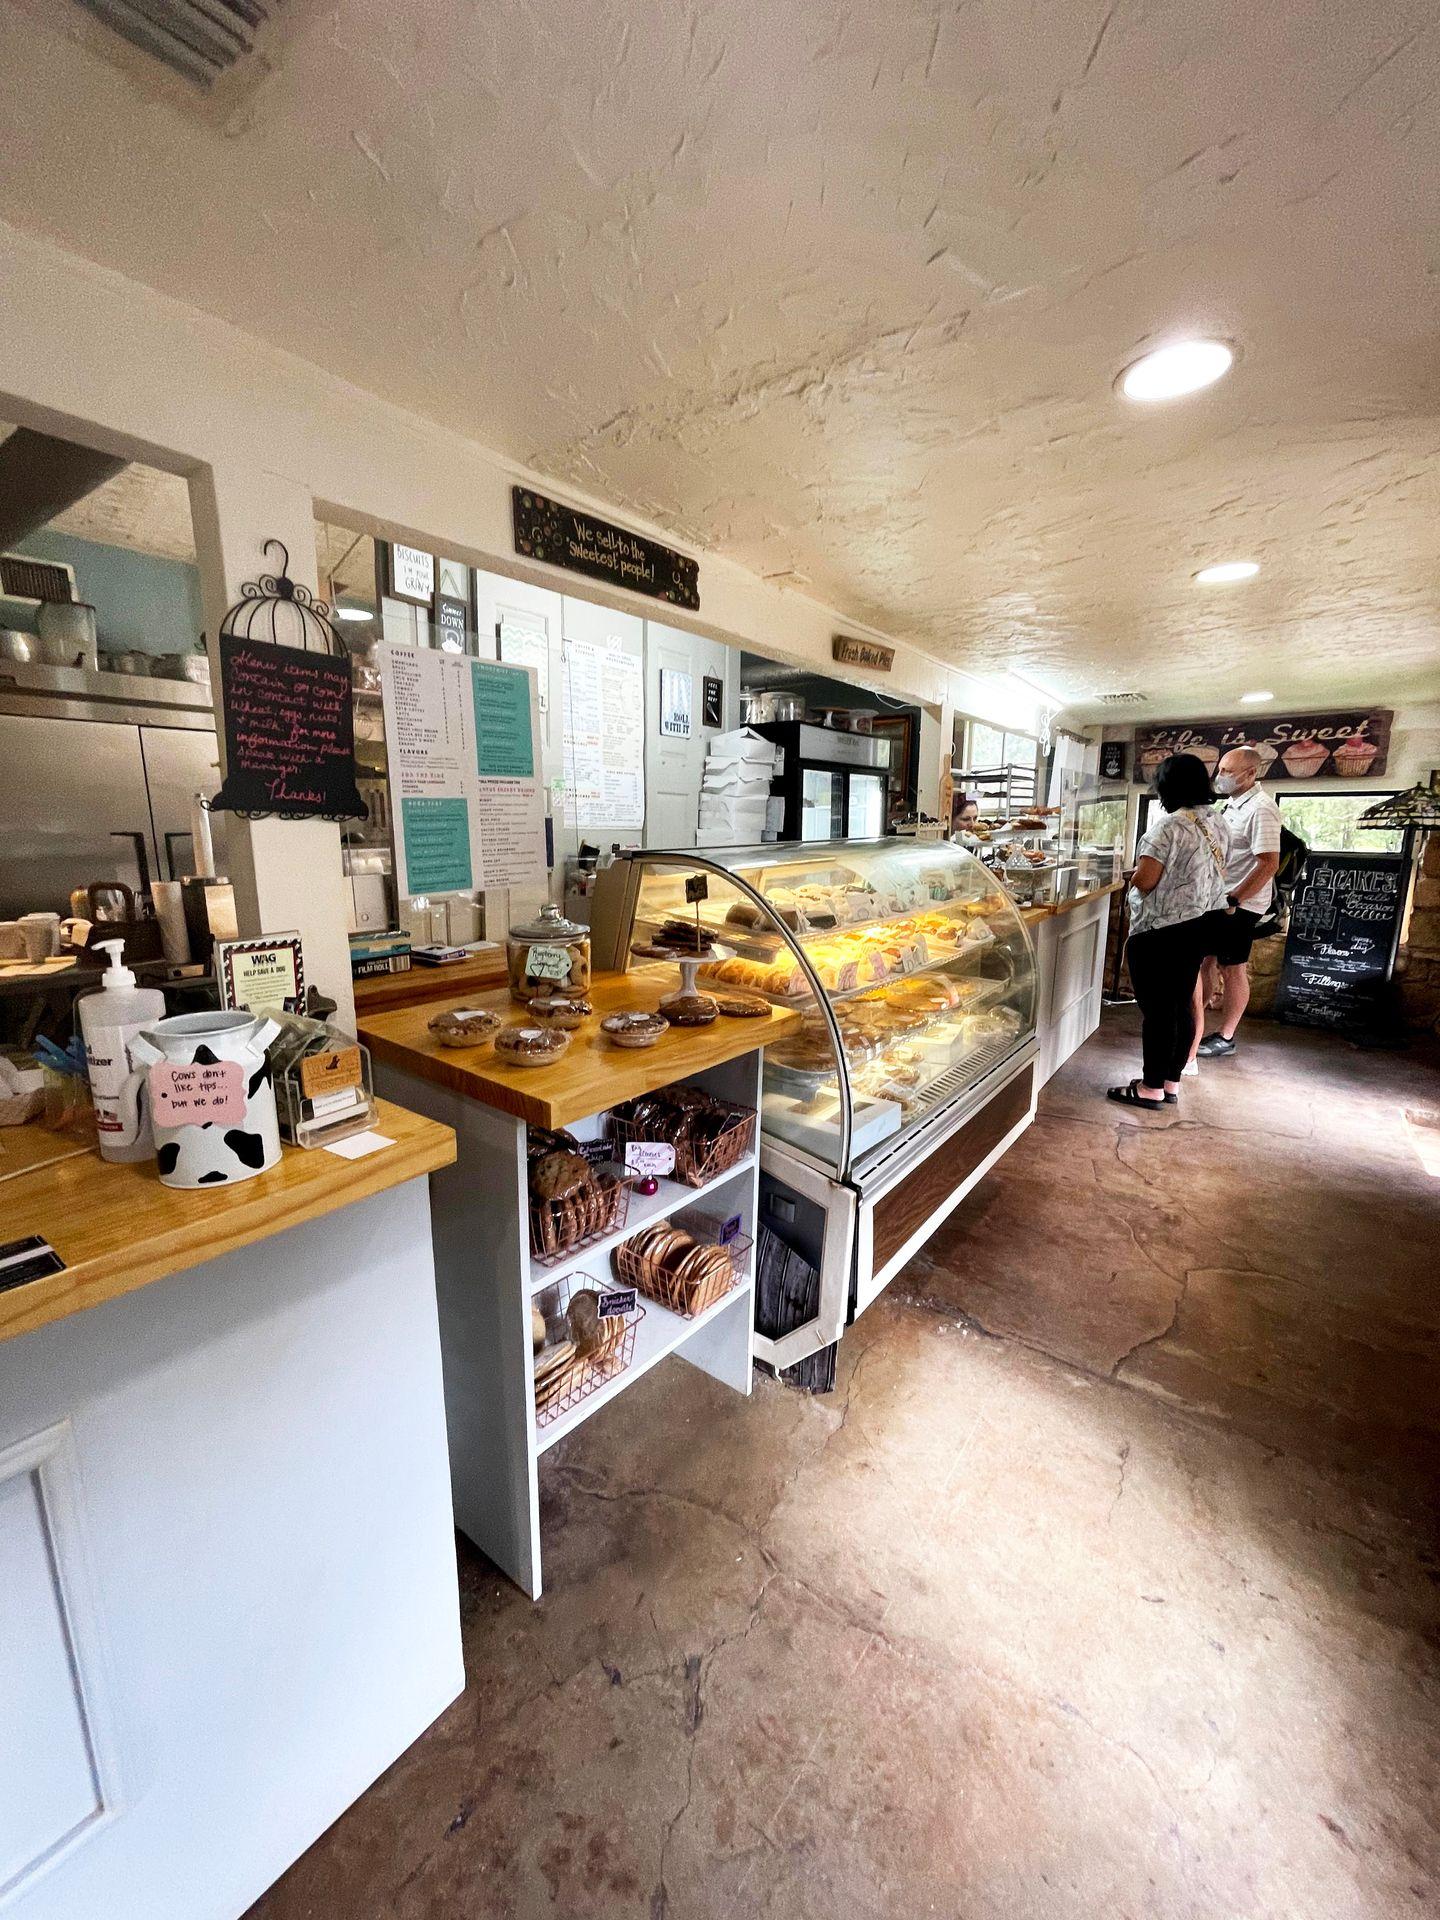 The inside of Sugar Shack Bakery, where there is a display case full of pastries.